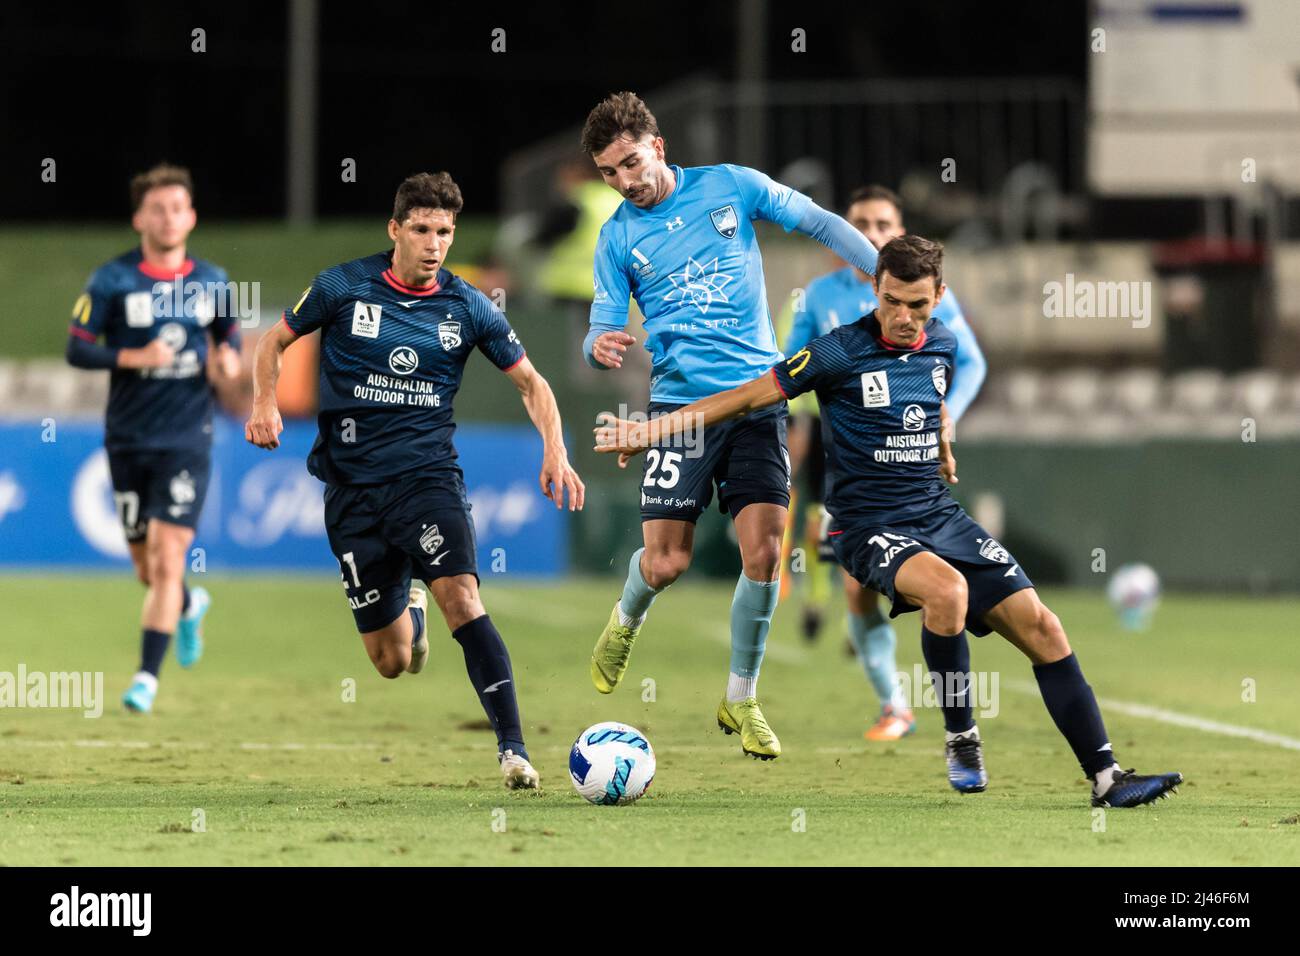 Sydney, Australia. April 12, 2022, Callum Talbot of Sydney FC and Javier Lopez of Adelaide United F.C. compete for the ball during the A-League match between Sydney FC and Adelaide United FC at Netstrata Jubilee Stadium, on April 12, 2022, in Sydney, Australia. Credit: Izhar Ahmed Khan/Alamy Live News/Alamy Live News Stock Photo